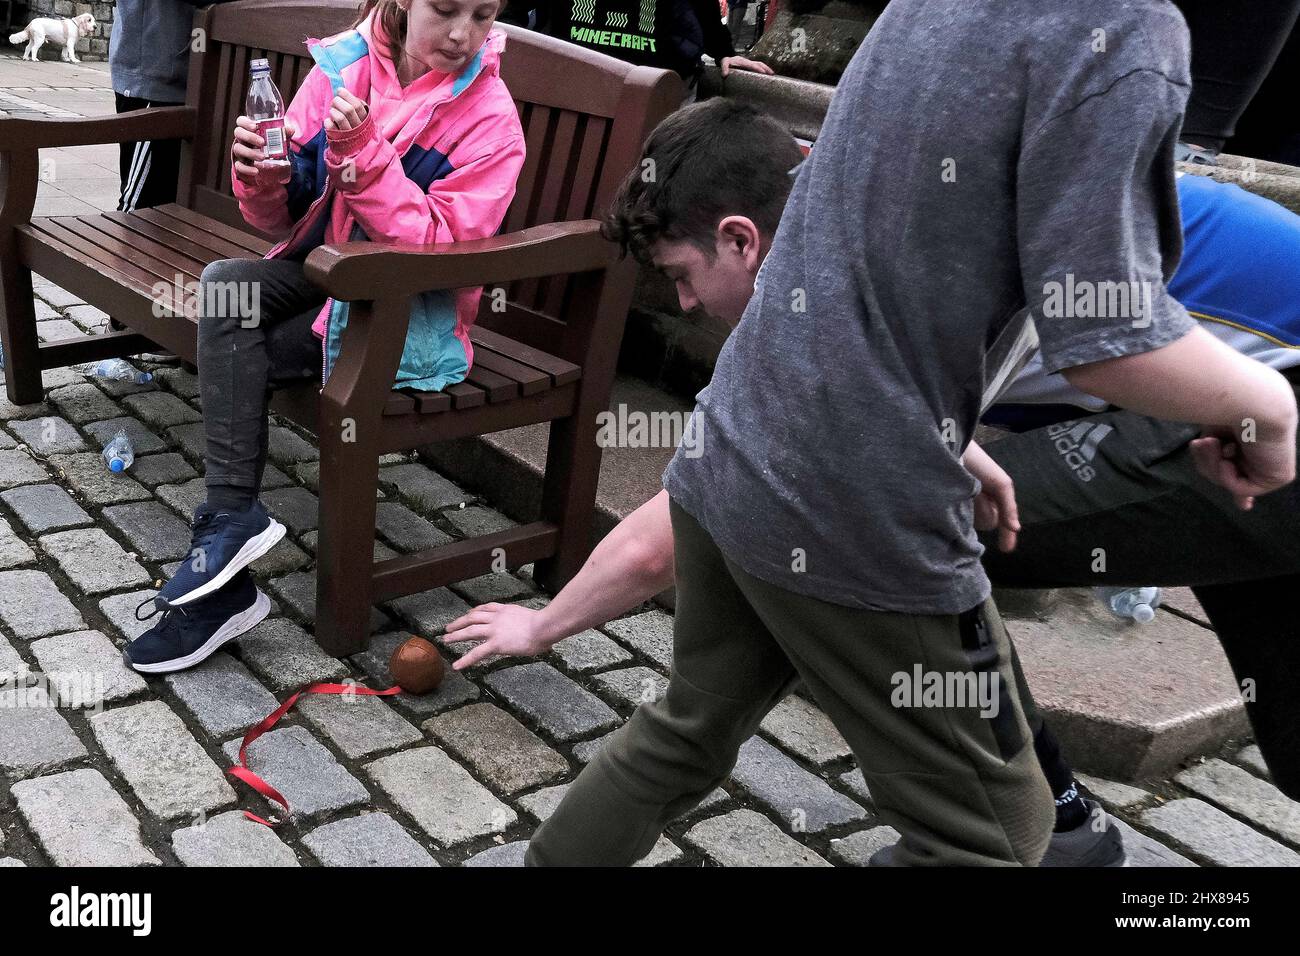 Jedburgh, Thursday 10 March 2022. A boy reaches for the Ba, while a young girl looks on during the annual 'Fastern Eve Handba' event in Jedburgh's High Street in the Scottish Borders on March 10, 2022 in Jedburgh, Scotland. The annual event, which started in the 1700's, takes place today and involves two teams, the Uppies (residents from the higher part of Jedburgh) and the Doonies (residents from the lower part of Jedburgh) getting the ball to either the top or bottom of the town. The ball, which is made of leather, stuffed with straw and decorated with ribbons is thrown into the crowd to beg Stock Photo